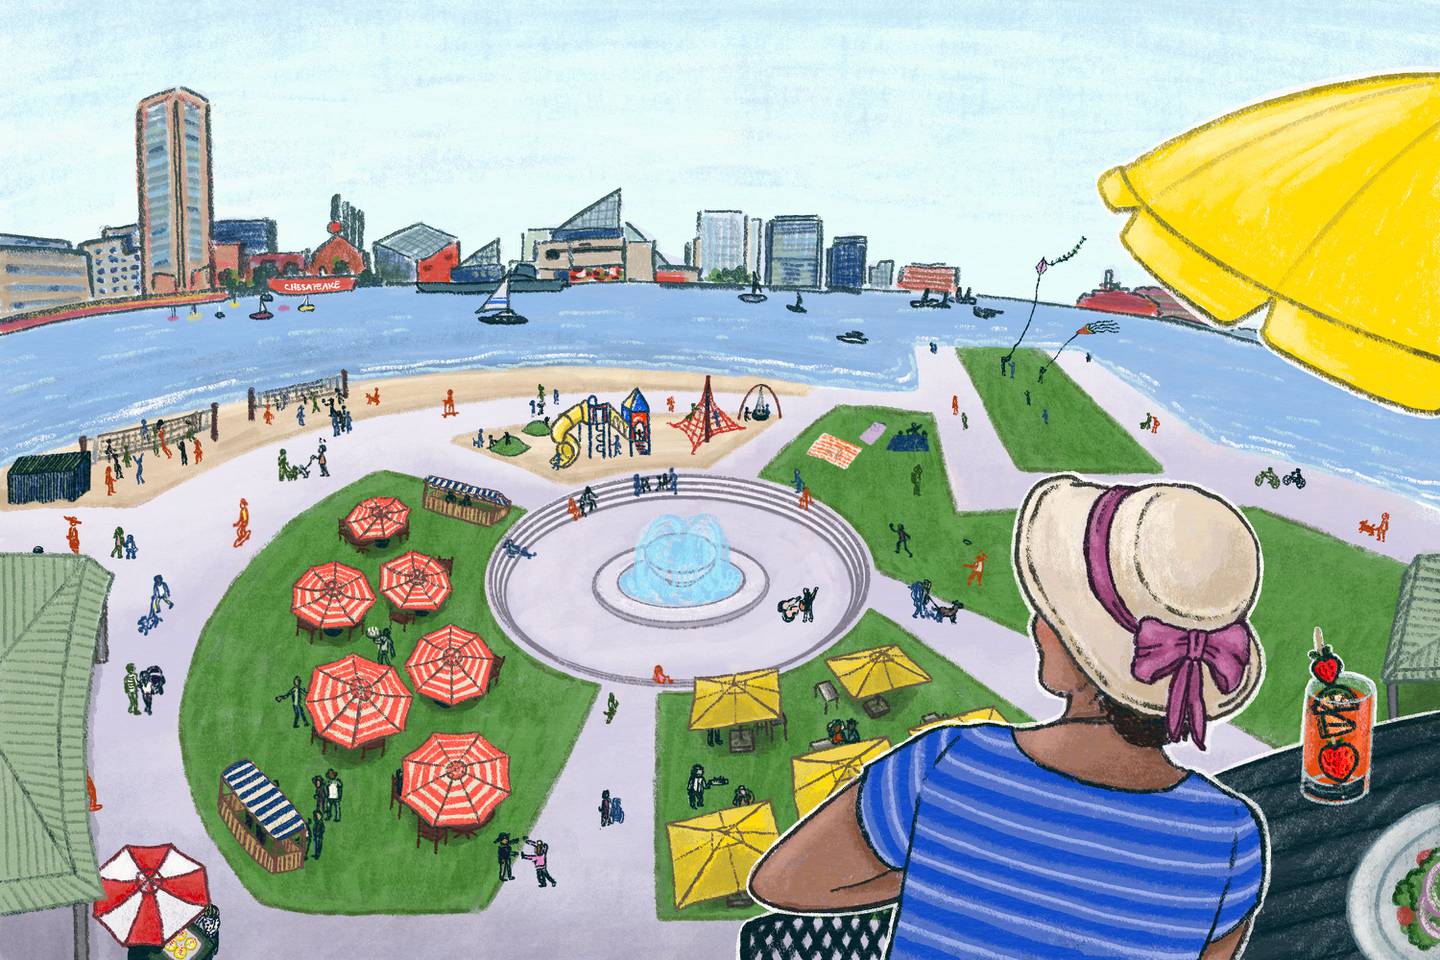 A hand drawn illustration of Harborplace as imagined by a reader. It shows a woman in a hat looking down upon green, landscaped open space beside the Inner Harbor.